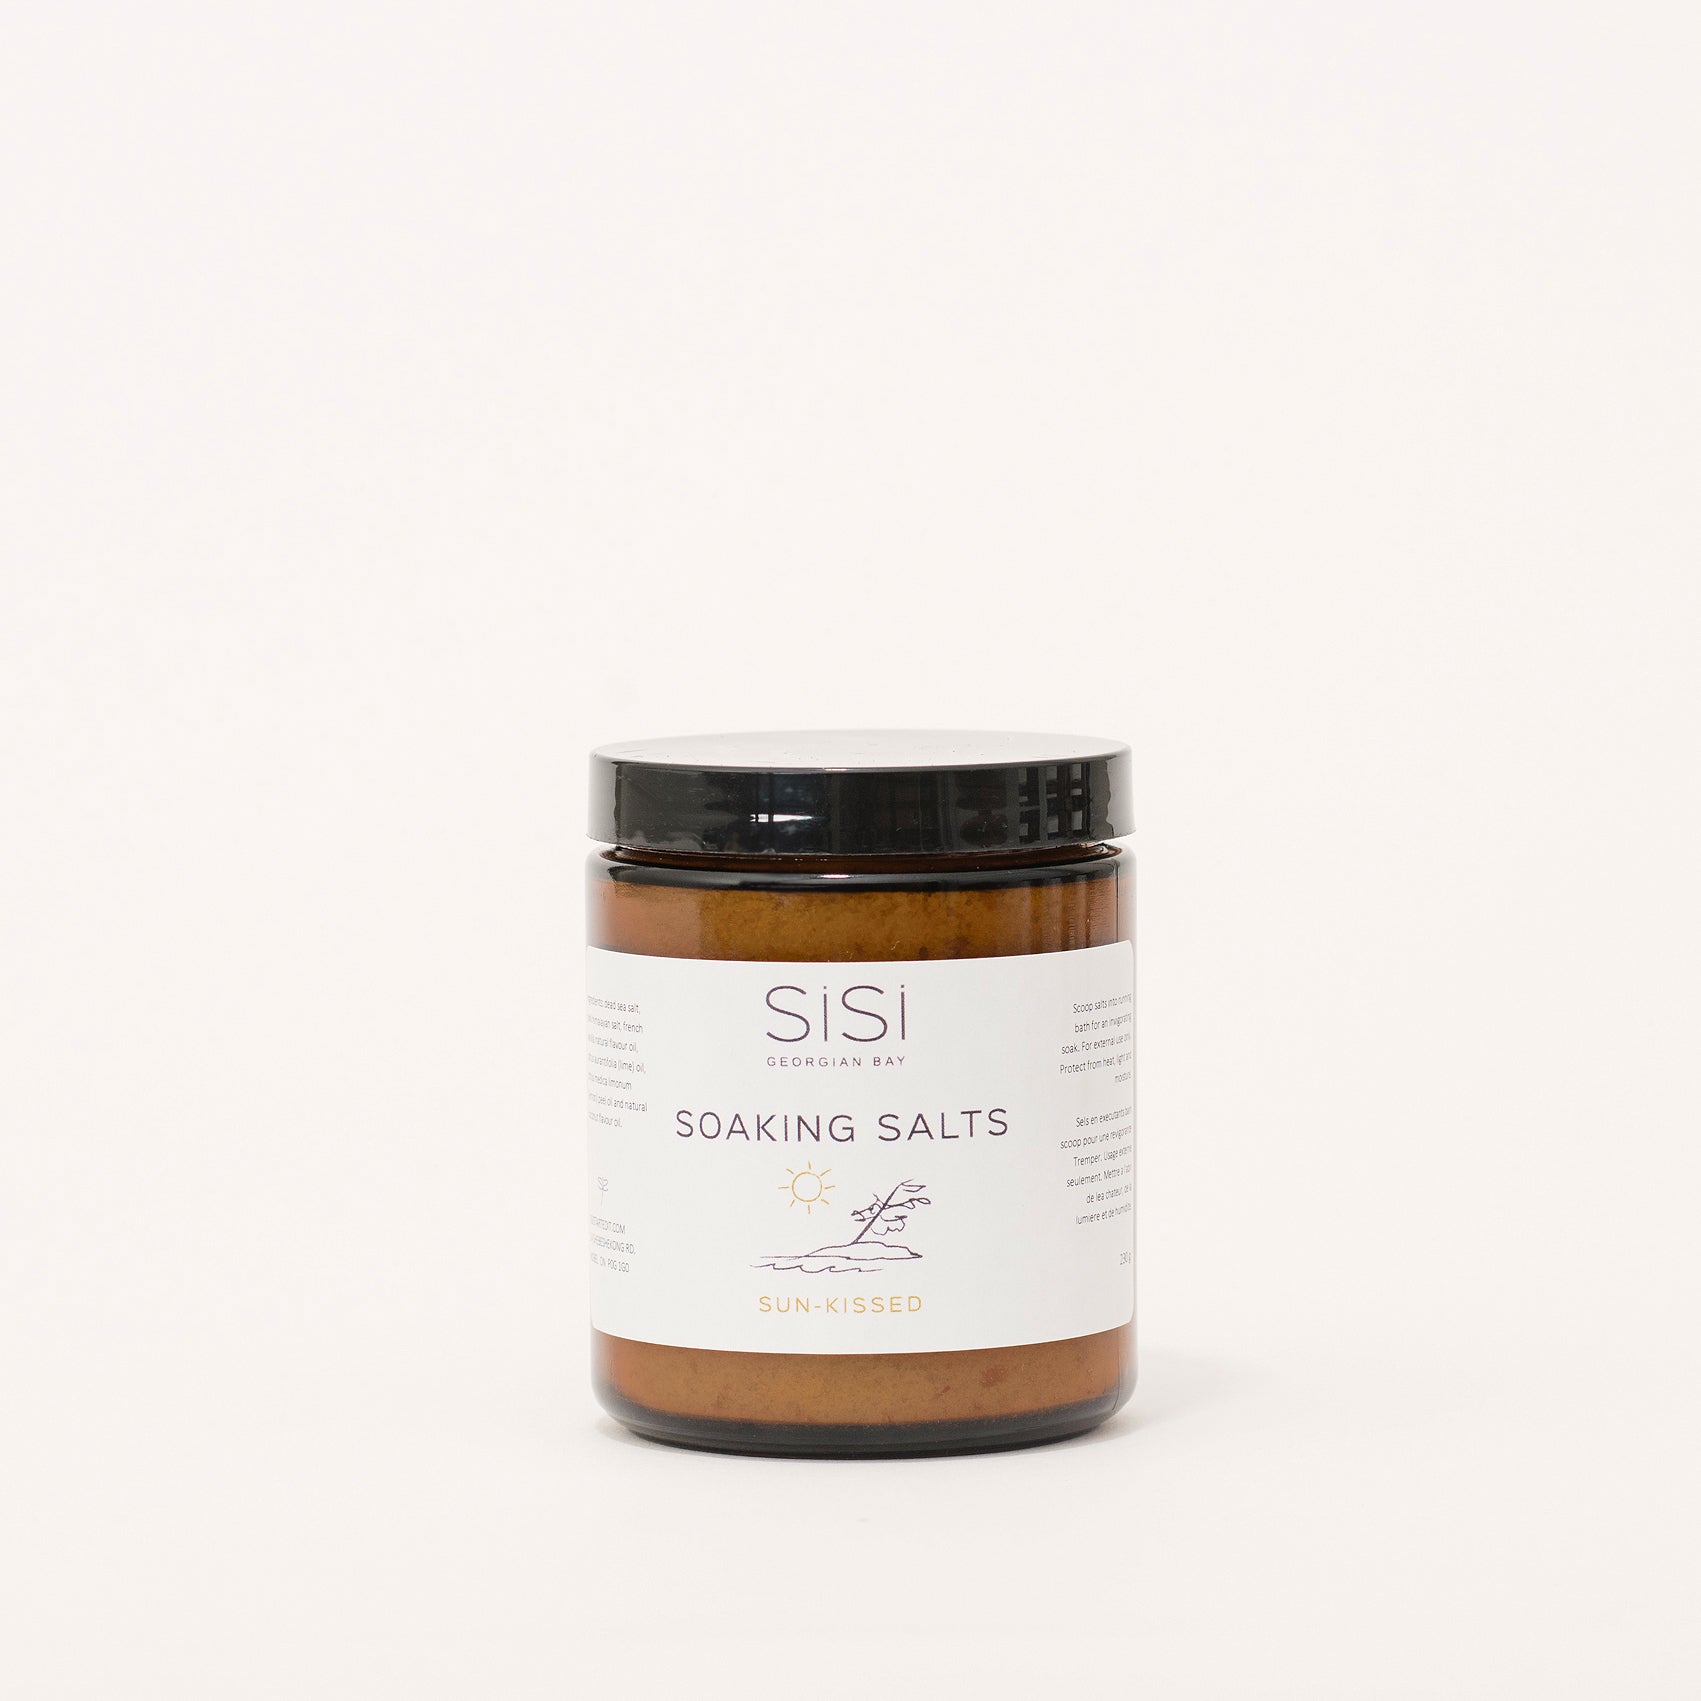 Apothecary Bath and Body Products - SiSi Georgian Bay Soaking Salts in amber glass jars with nature inspired artsy labels on a creamy white background